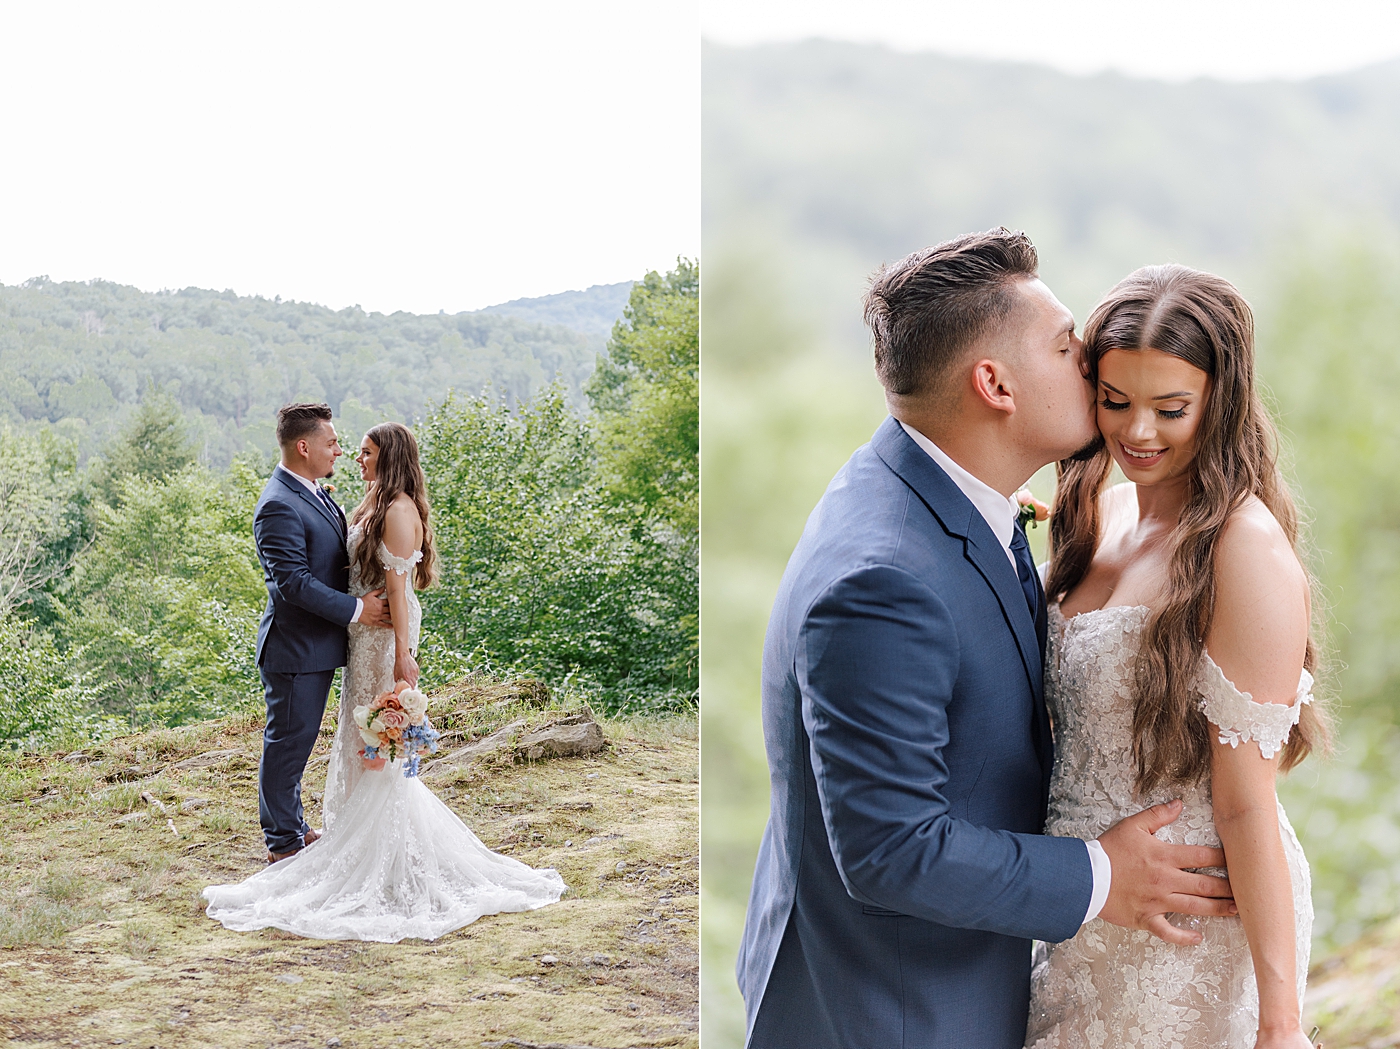 Bride and groom embracing in the mountains | Image by Hope Helmuth Photography 